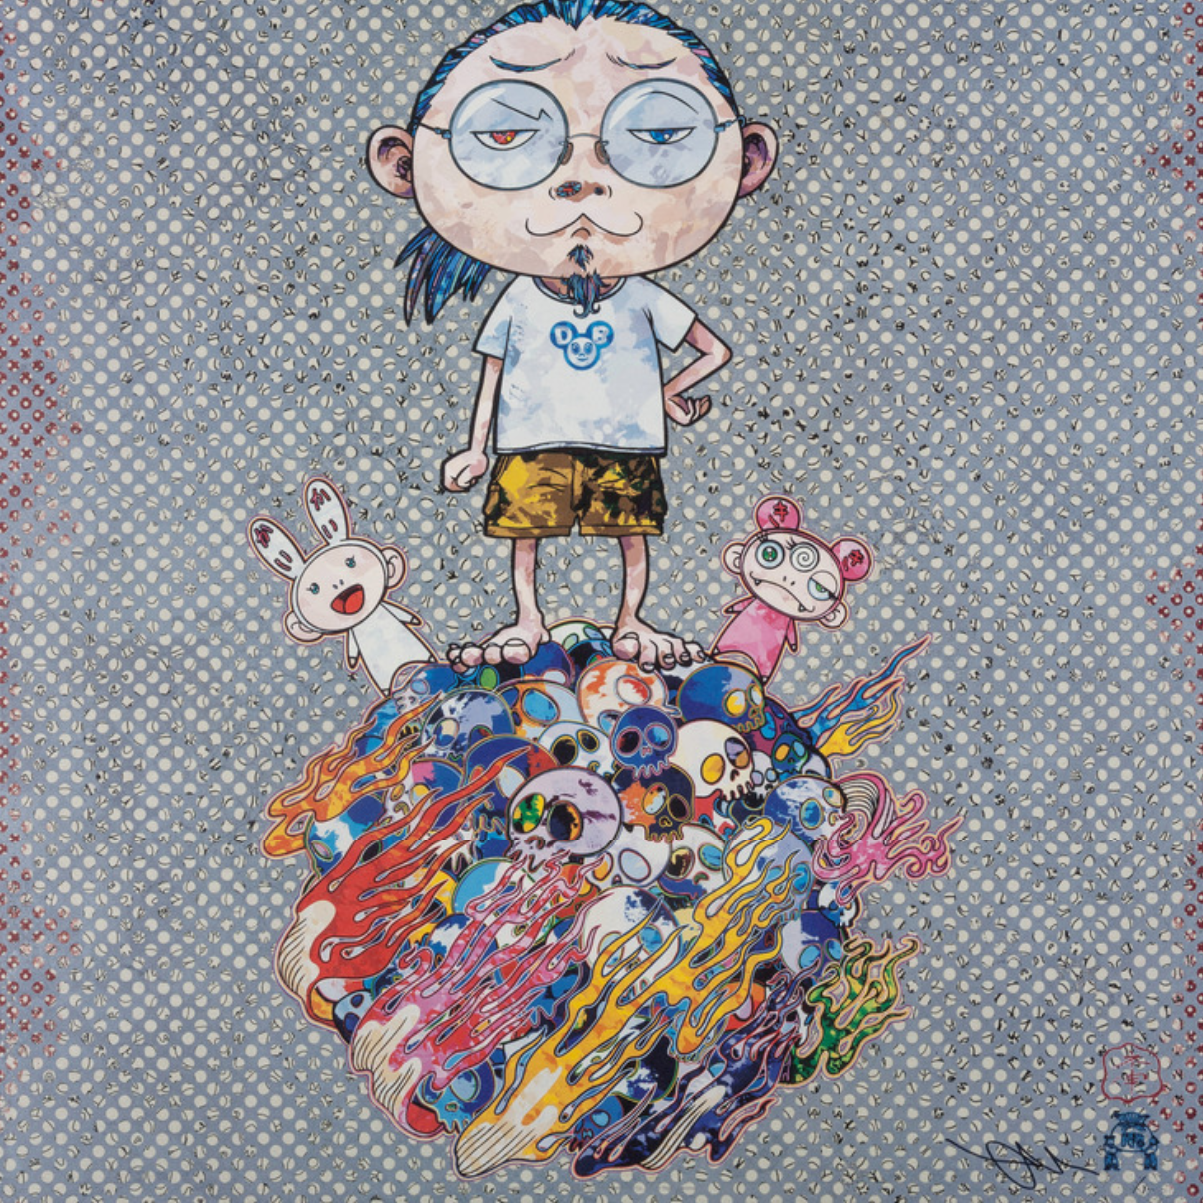 Takashi Murakami, Excuse Painting: On my collaboration with Doraemon  (2019), Available for Sale